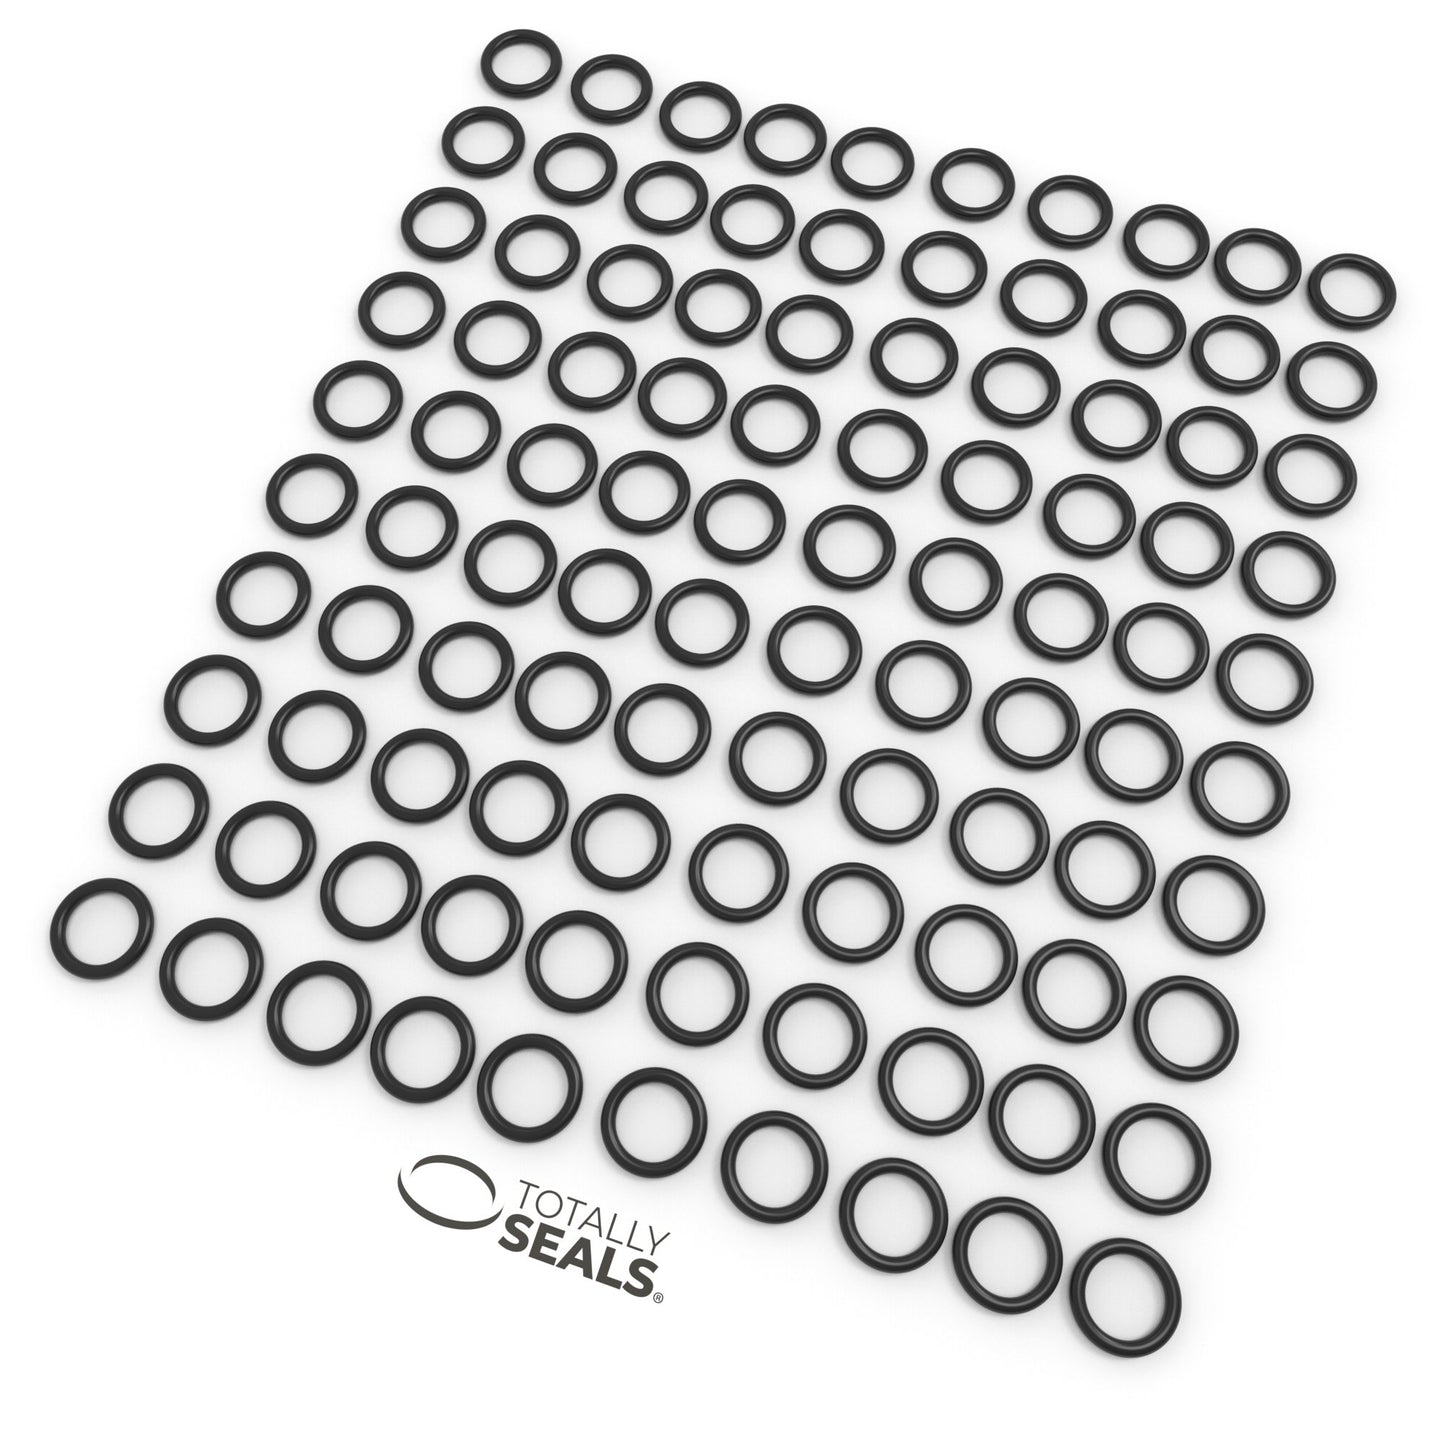 11mm x 3.5mm (18mm OD) Nitrile O-Rings - Totally Seals®